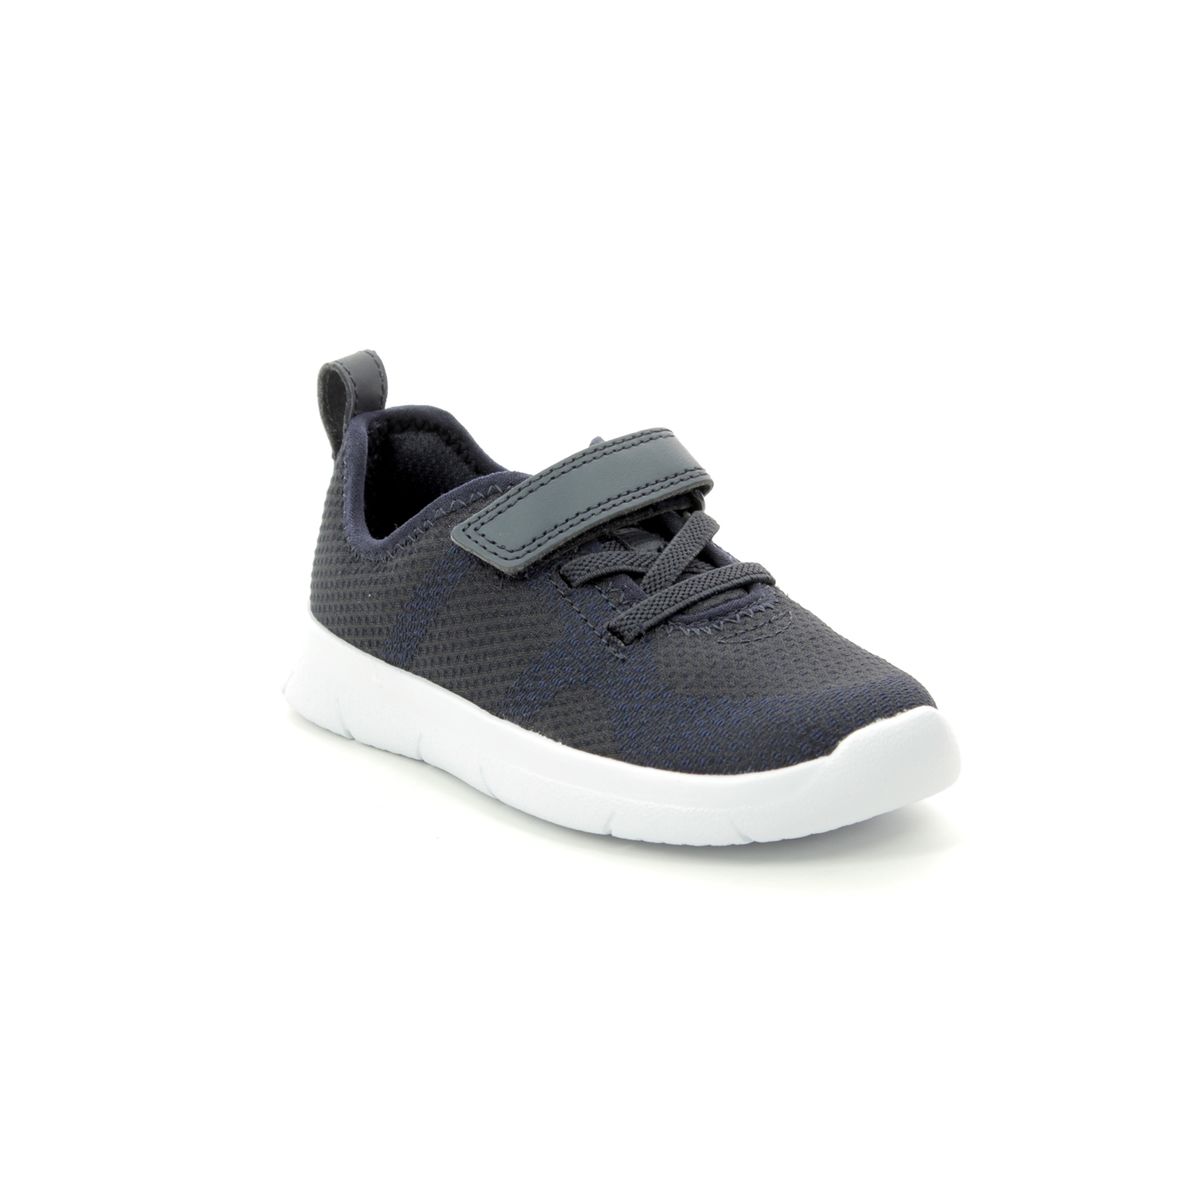 Clarks Ath Flux T Navy Kids Toddler Boys Trainers 412696F In Size 5 In Plain Navy F Width Fitting Regular Fit For kids